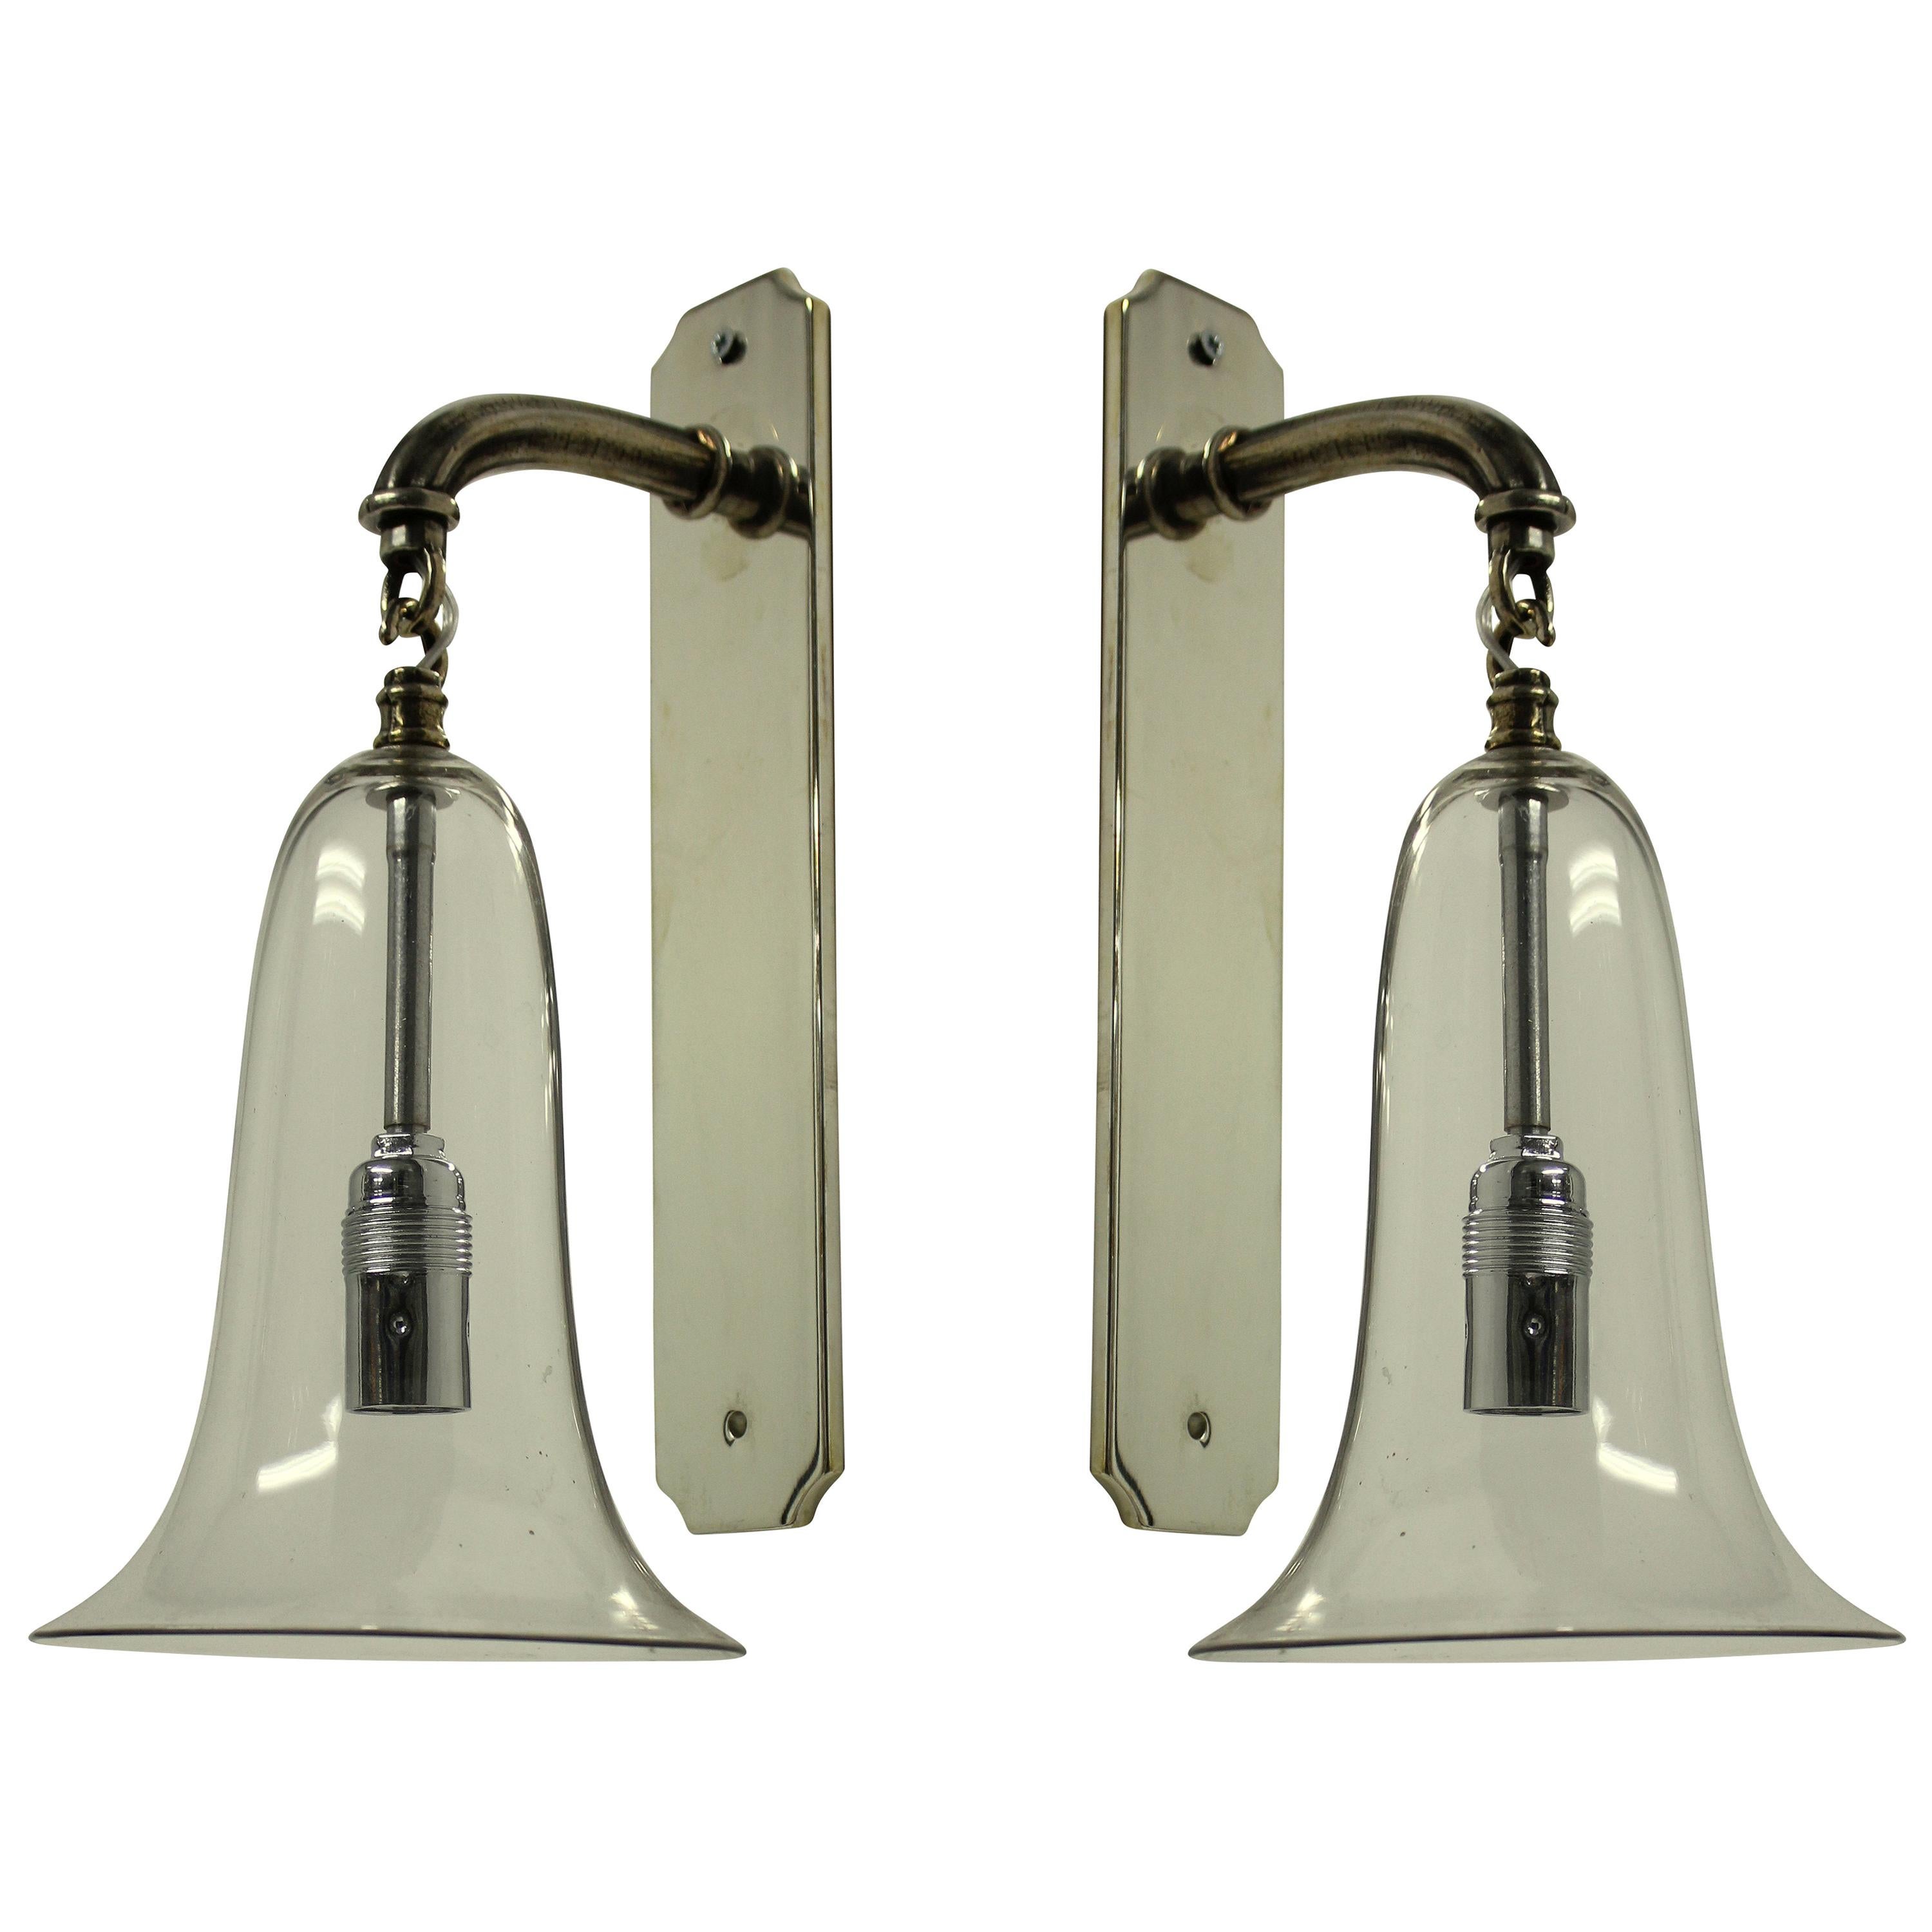 Pair of 1920s Glass Bell Wall Sconces